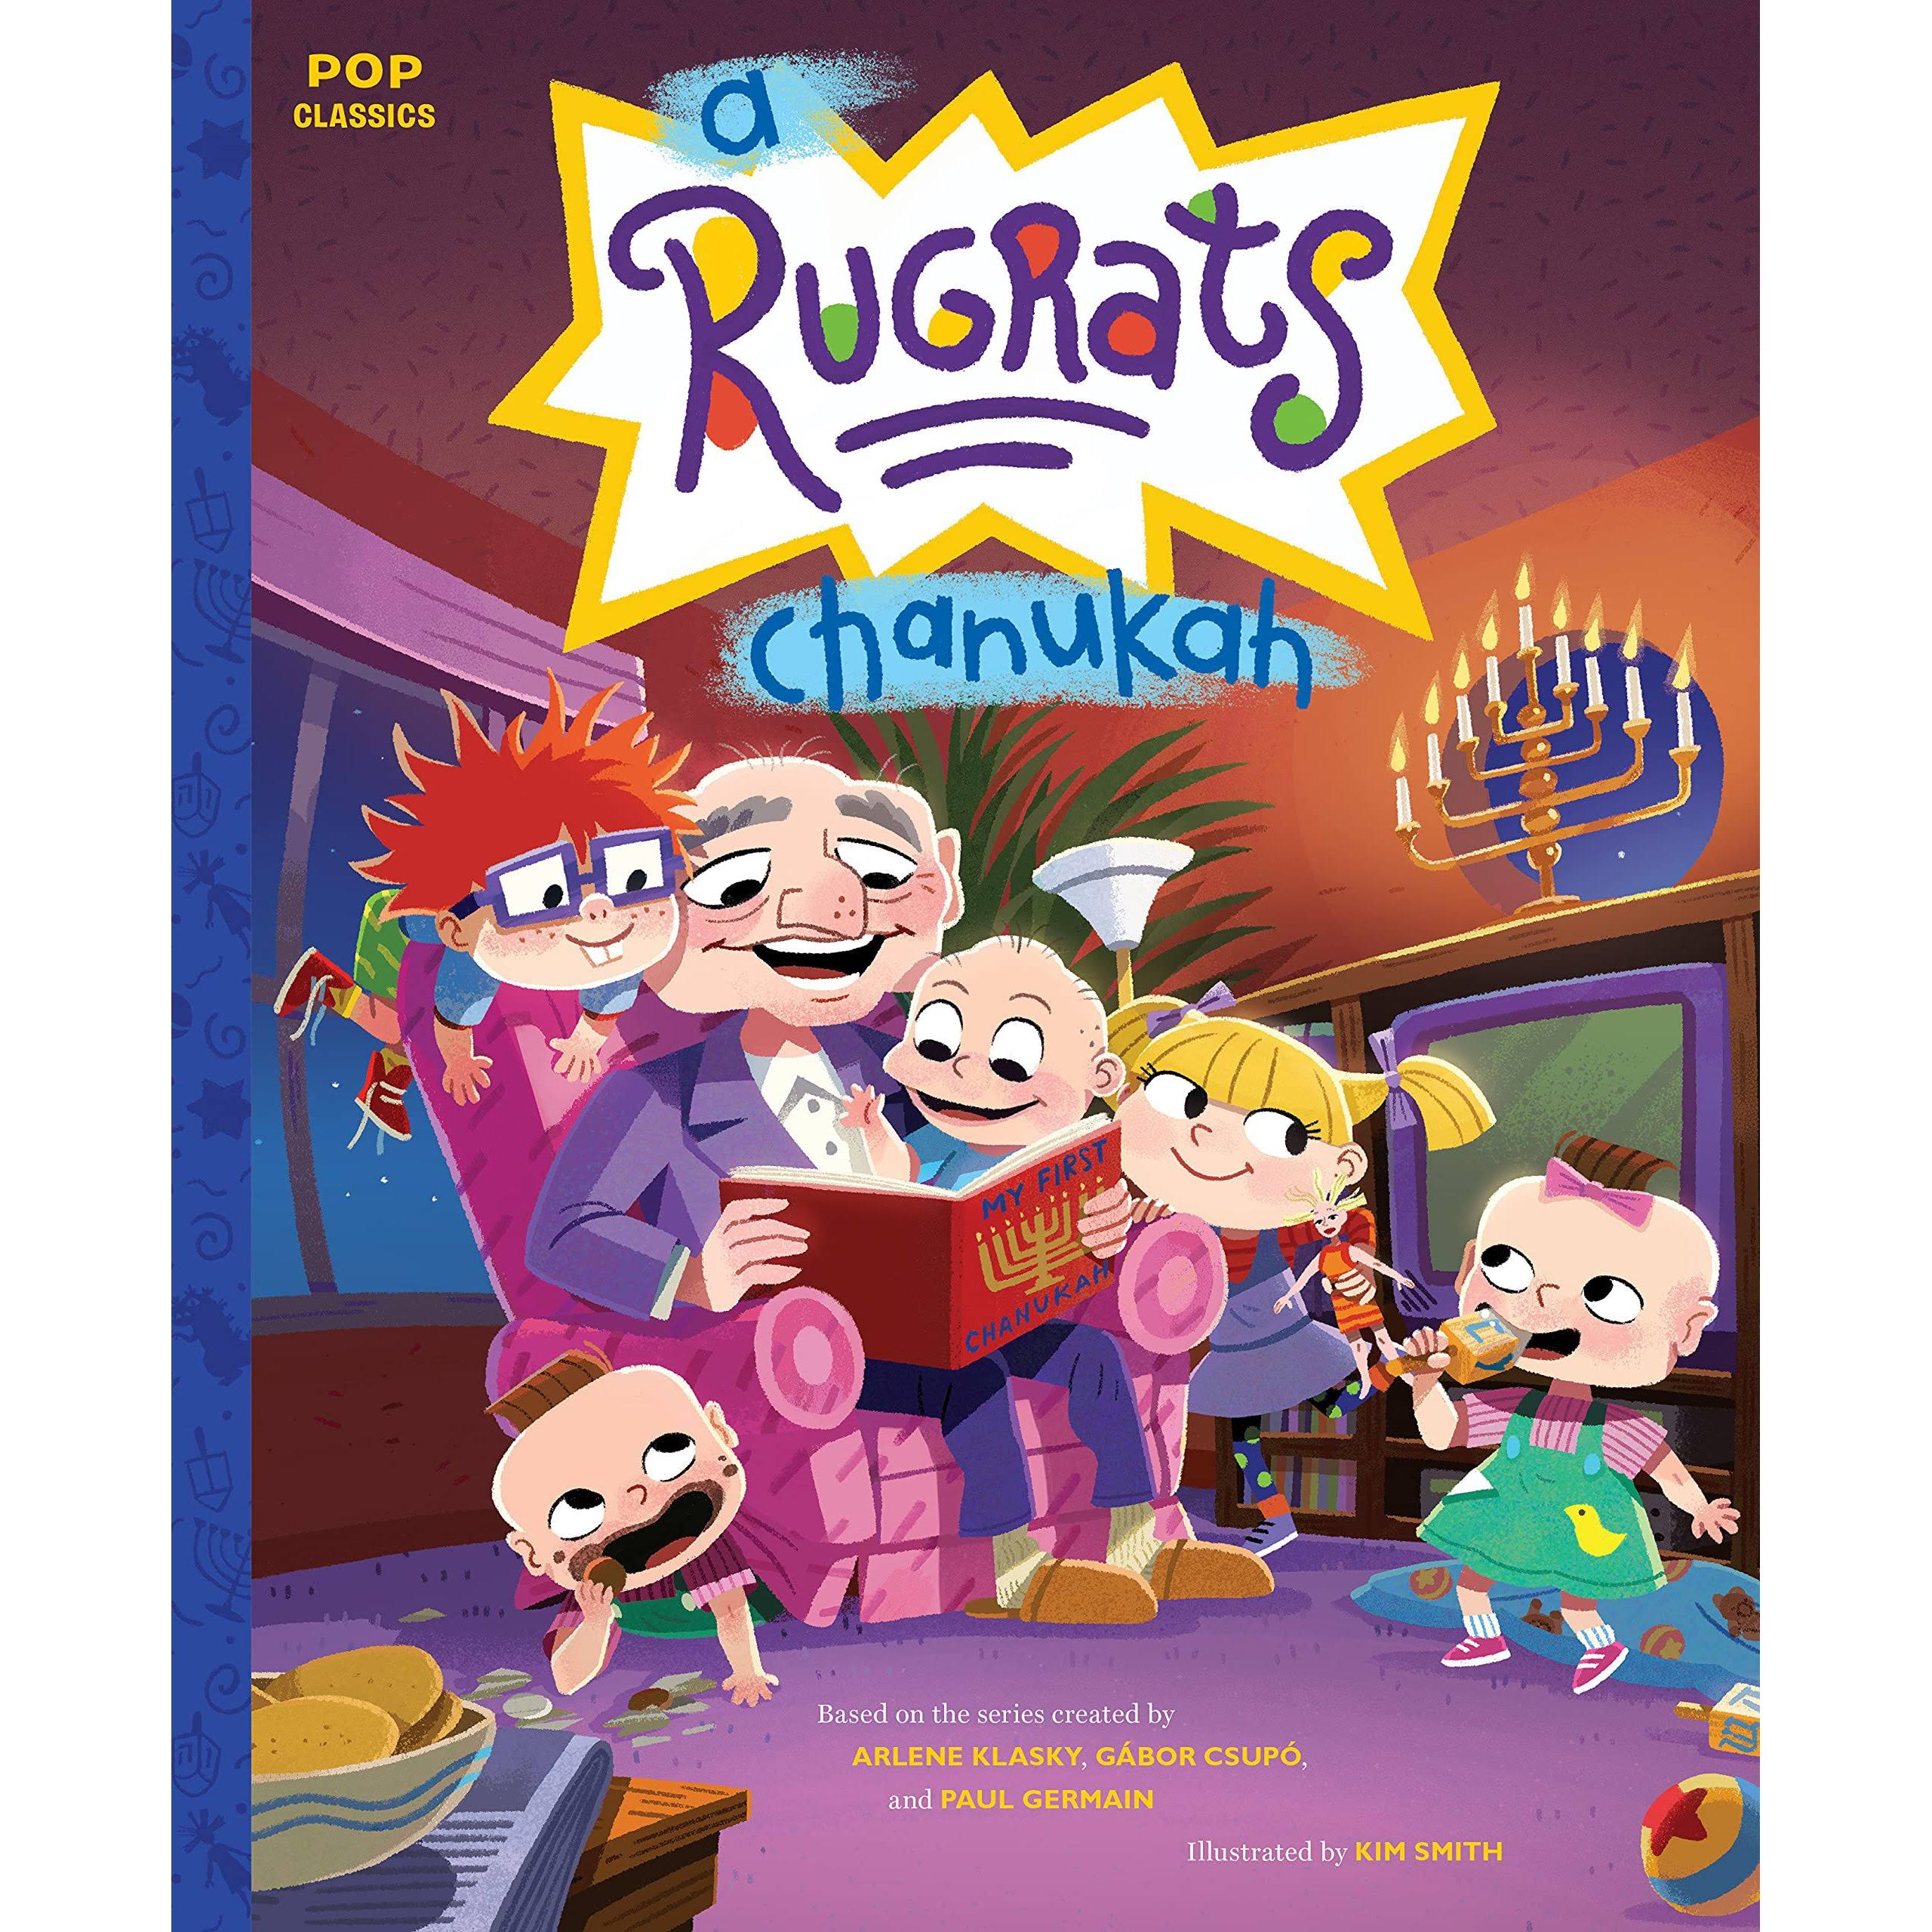 A Rugrats Chanukah: The Classic Illustrated Storybook